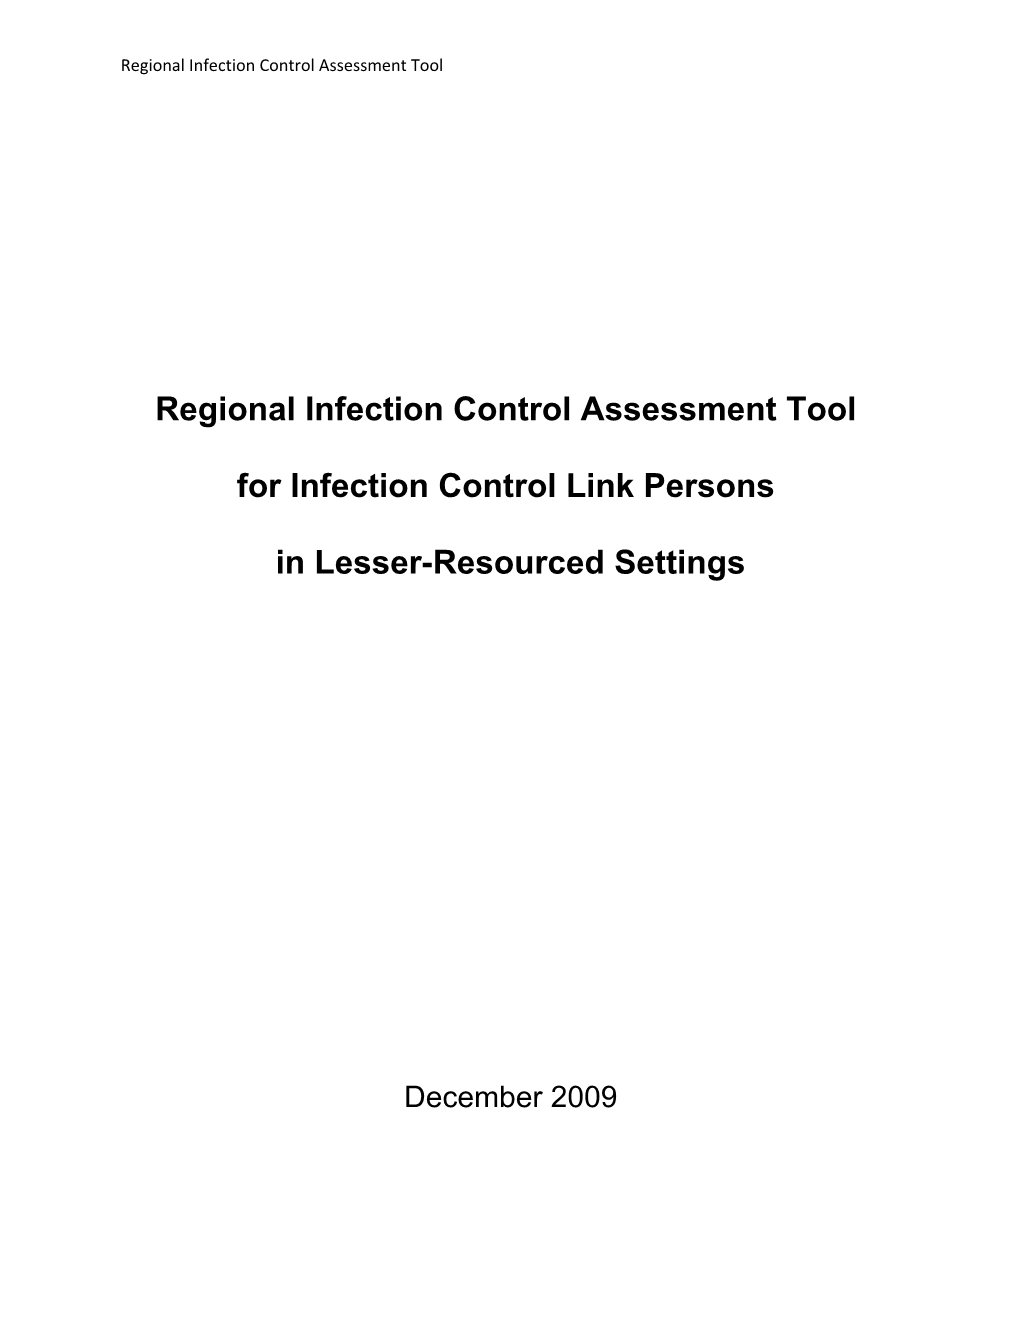 User Manual (Regional Infection Control Assessment Tool) Attachment 1